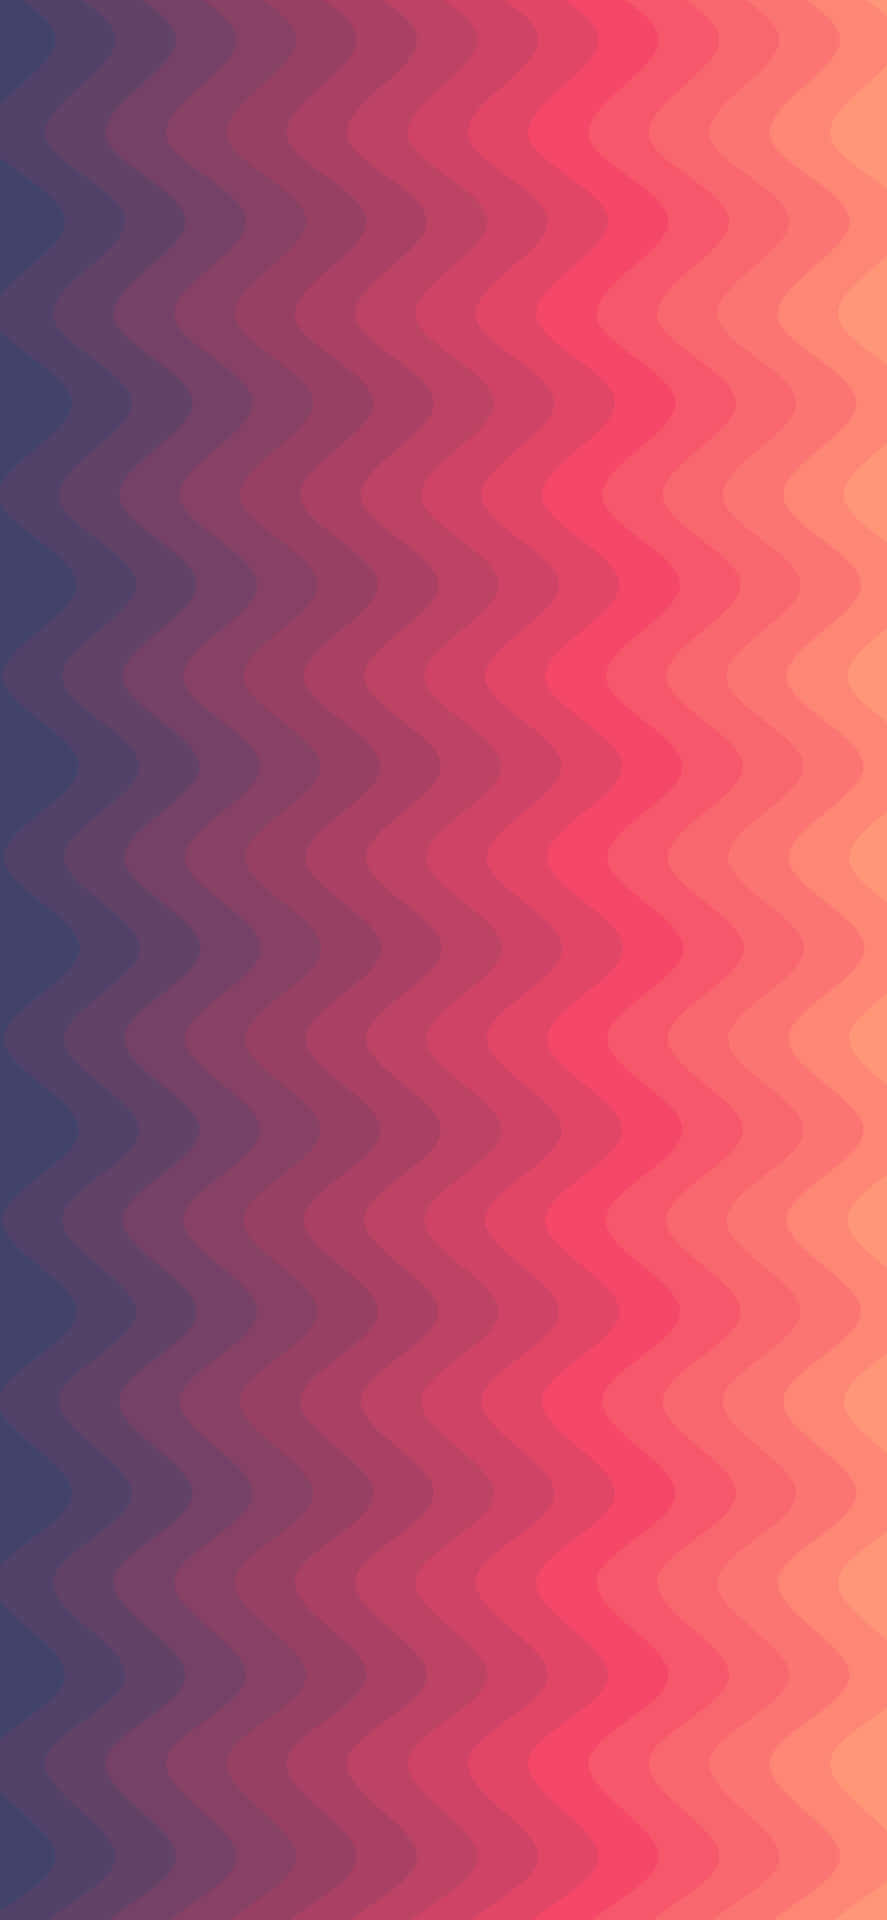 A Colorful Zigzag Pattern With Pink, Orange And Blue Colors Wallpaper